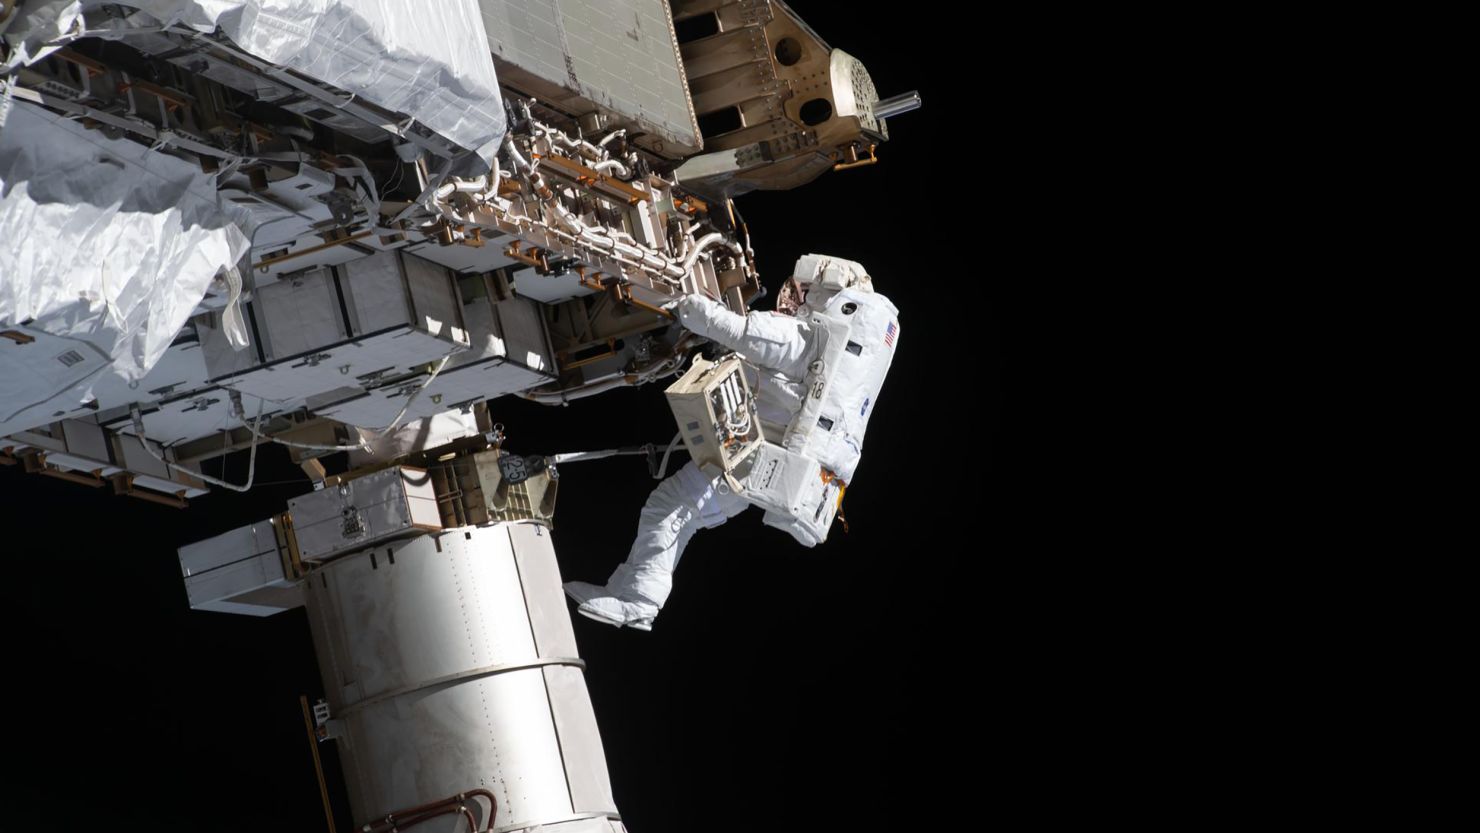 NASA astronaut Victor Glover Jr. conducted a spacewalk outside the International Space Station on January 27 in preparation for upcoming solar array upgrades.